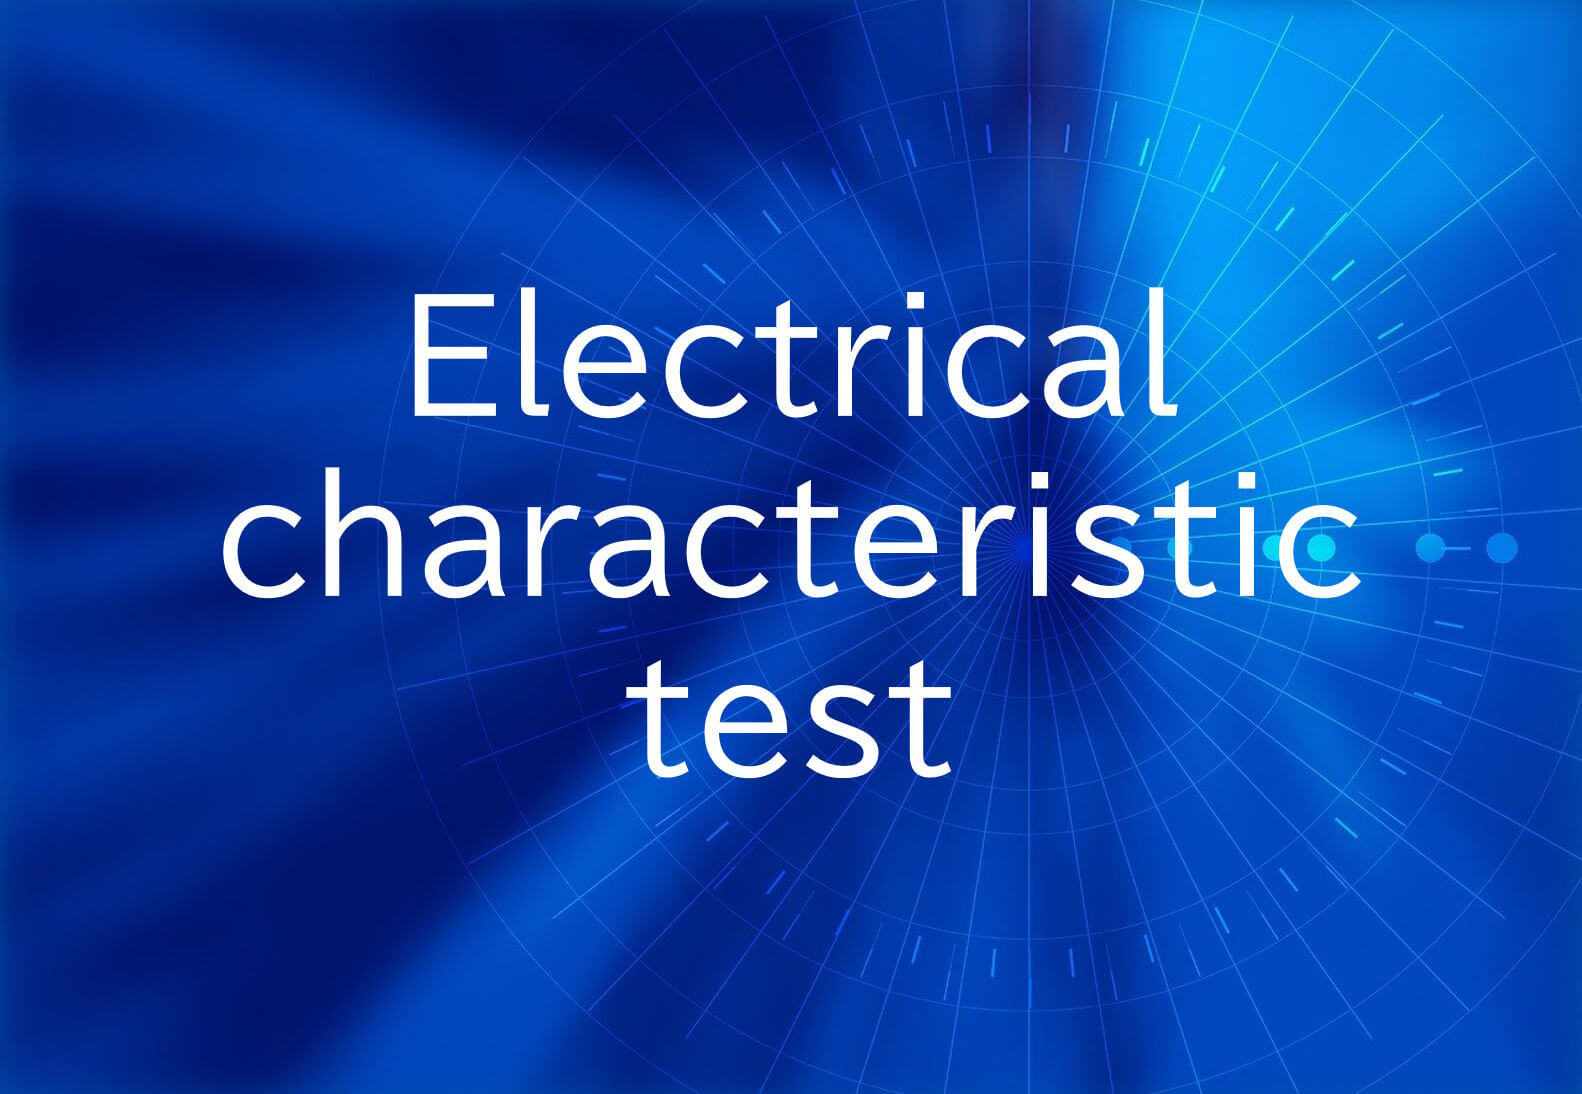 Electrical characteristic test 